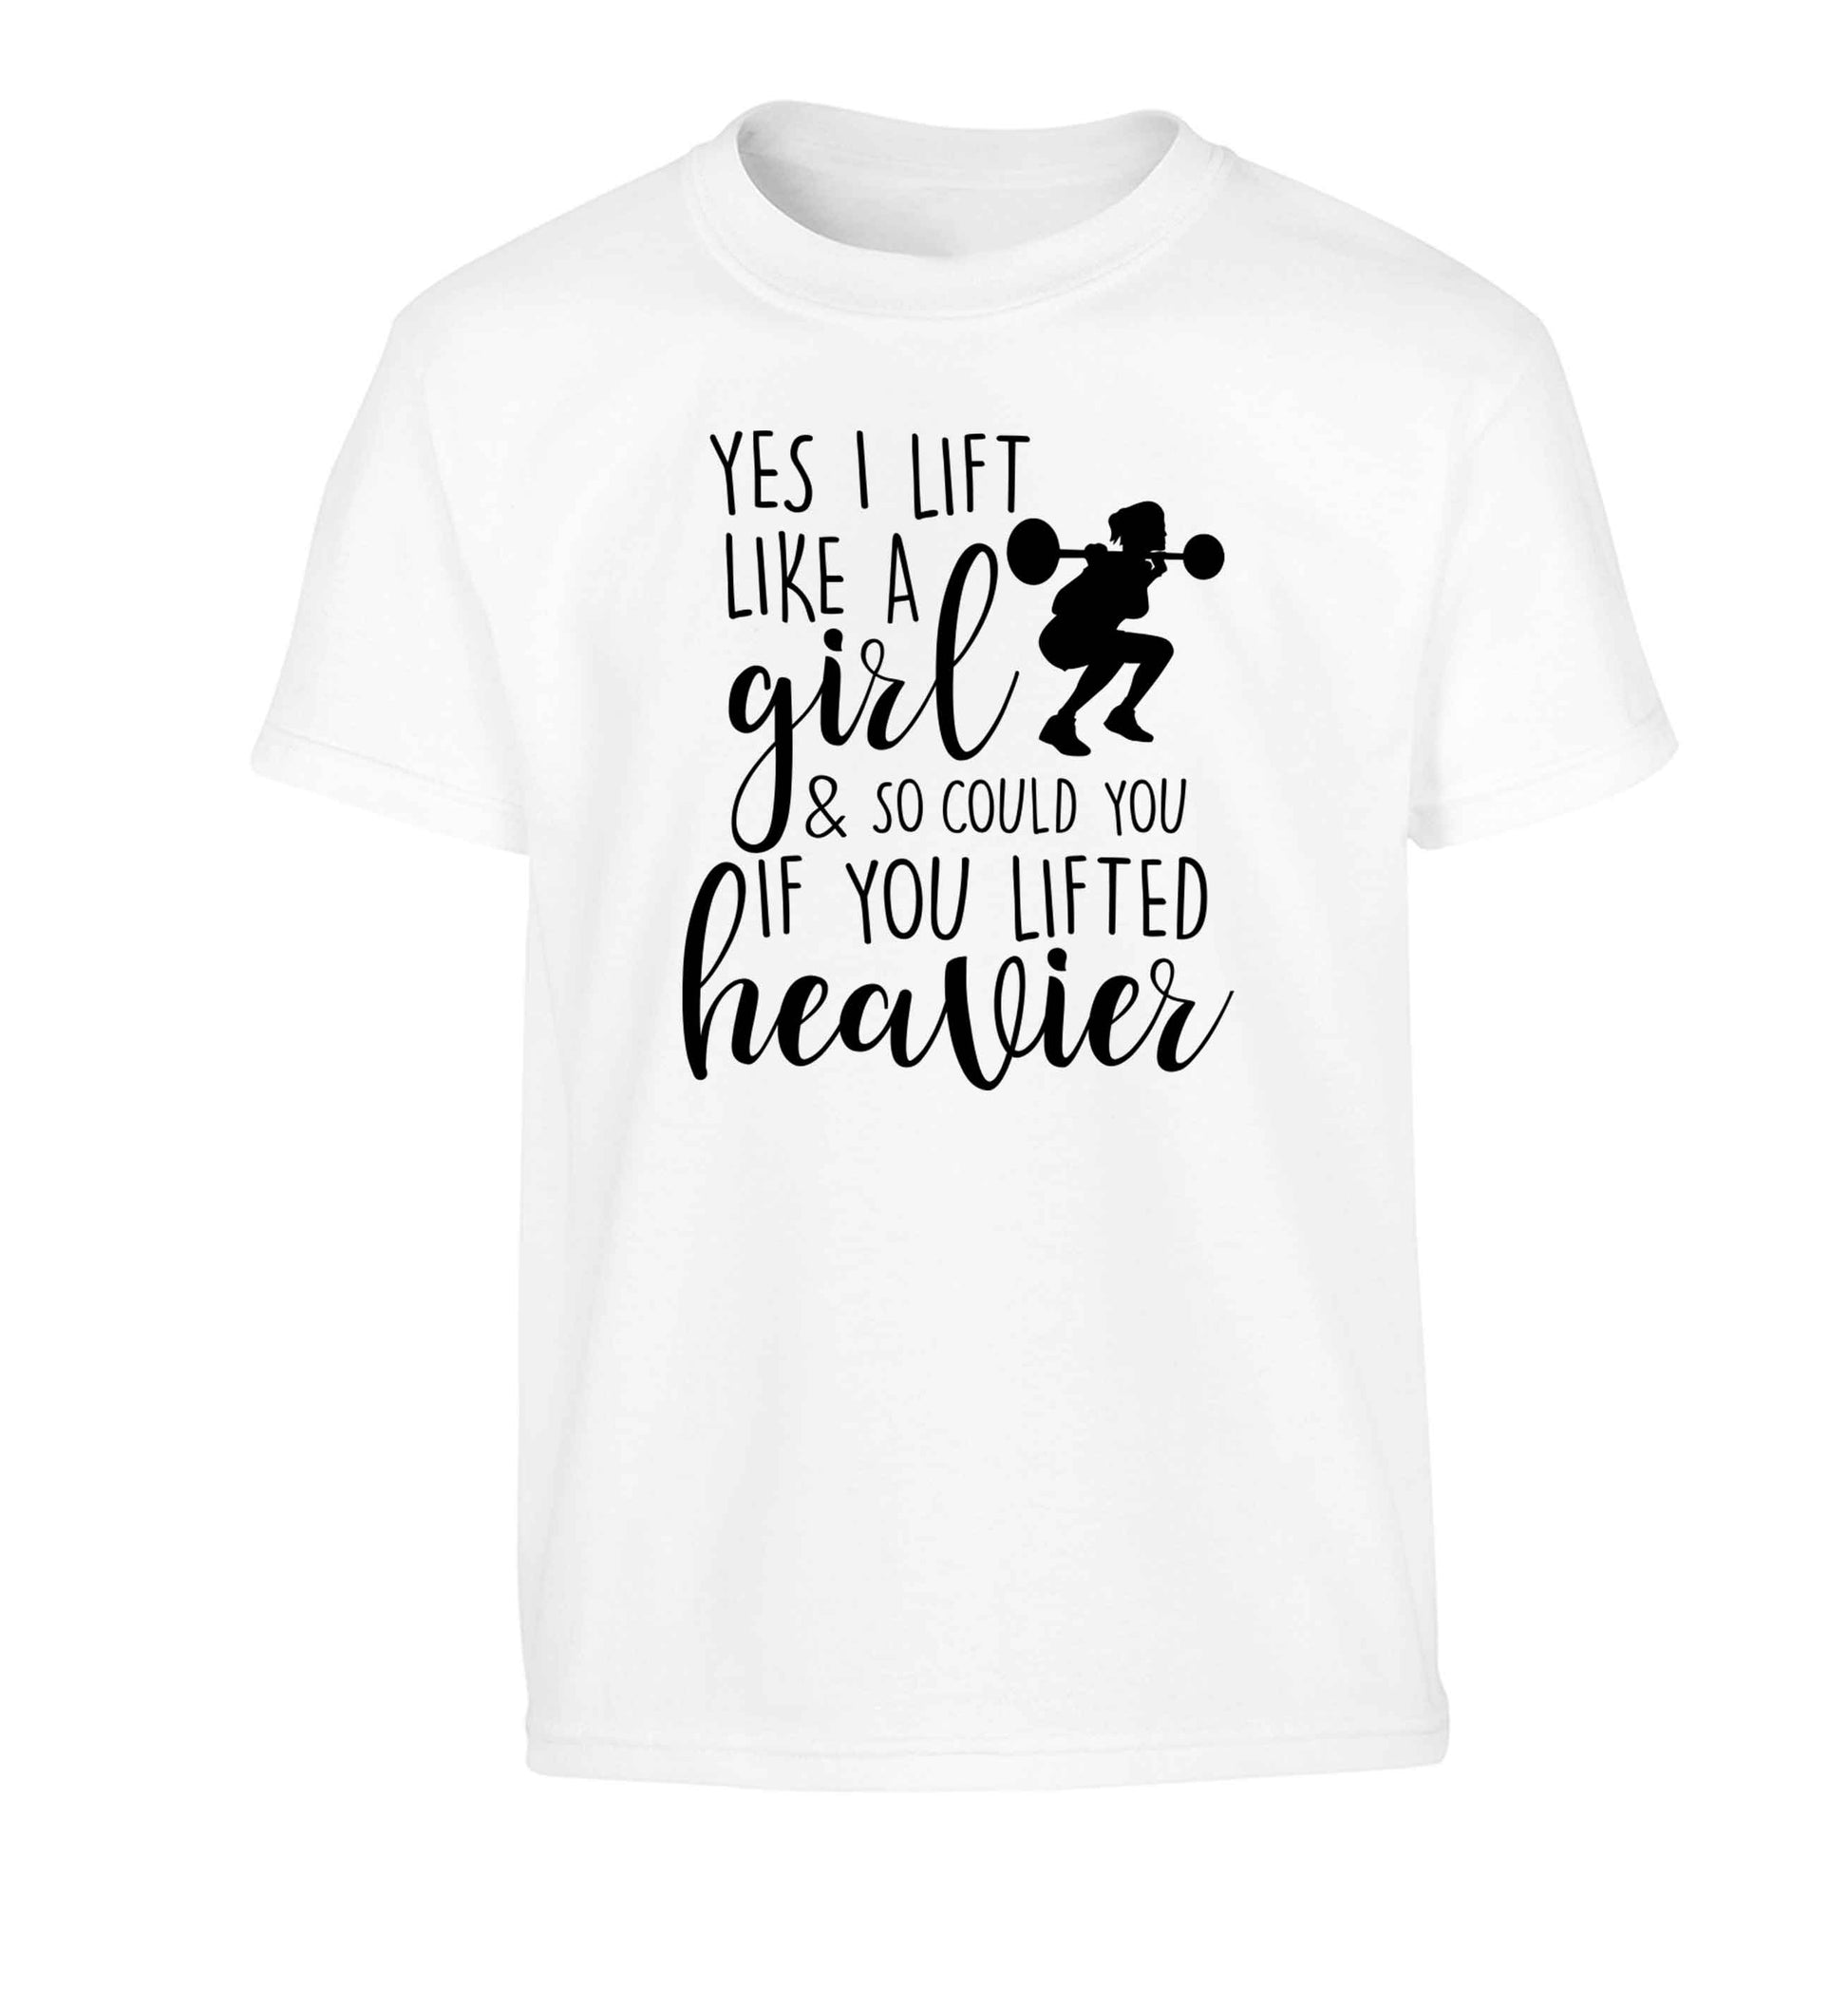 Yes I lift like a girl and so could you if you lifted heavier Children's white Tshirt 12-13 Years